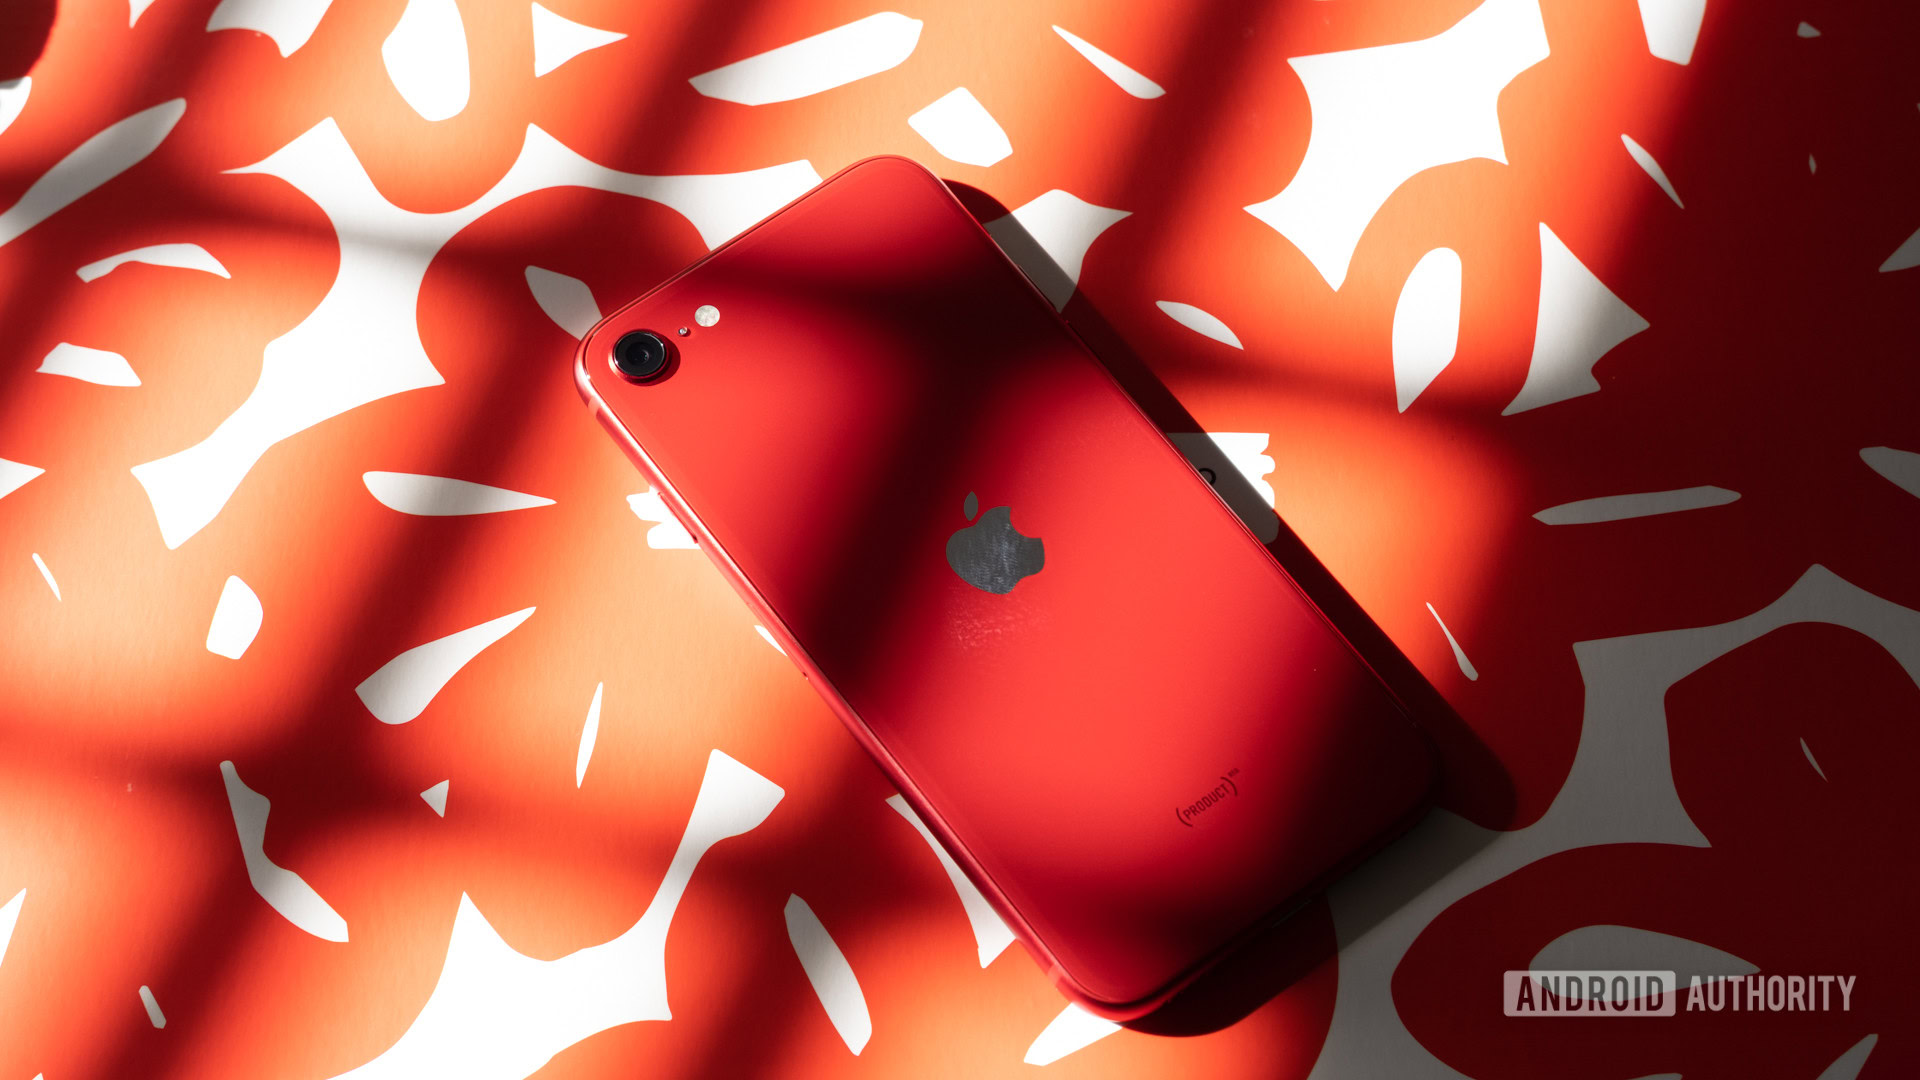 iPhone SE face down showing rear with camera and Apple logo, on a white and red patterned background.